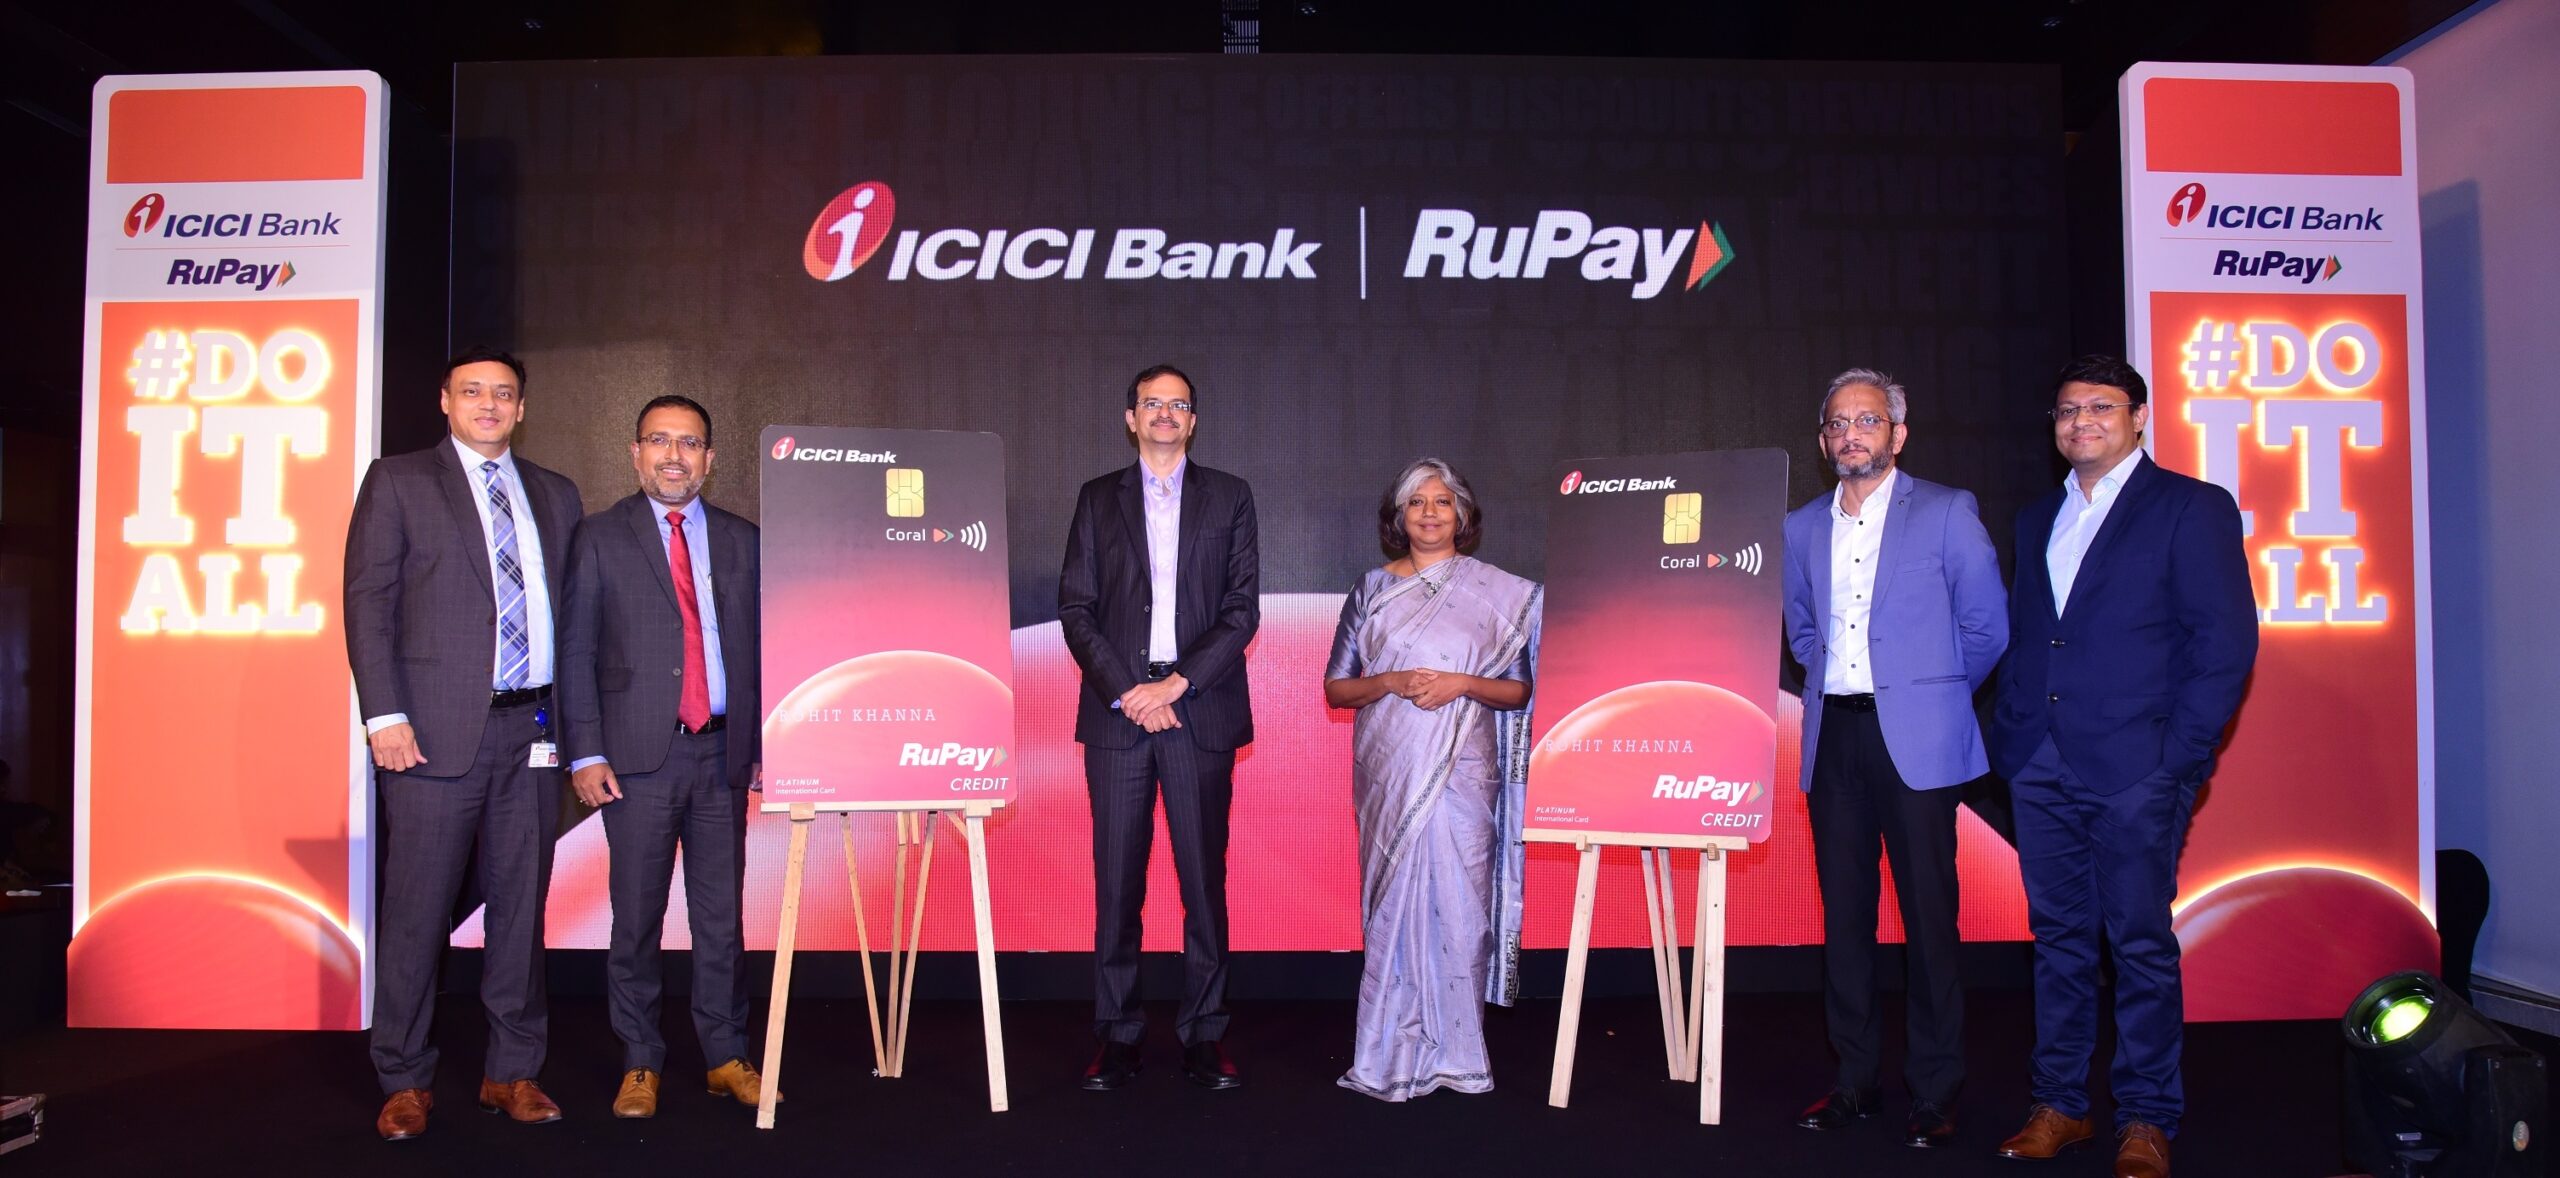 Release-ICICI-Bank-partners-with-NPCI-to-launch-RuPay-credit-card.jpg